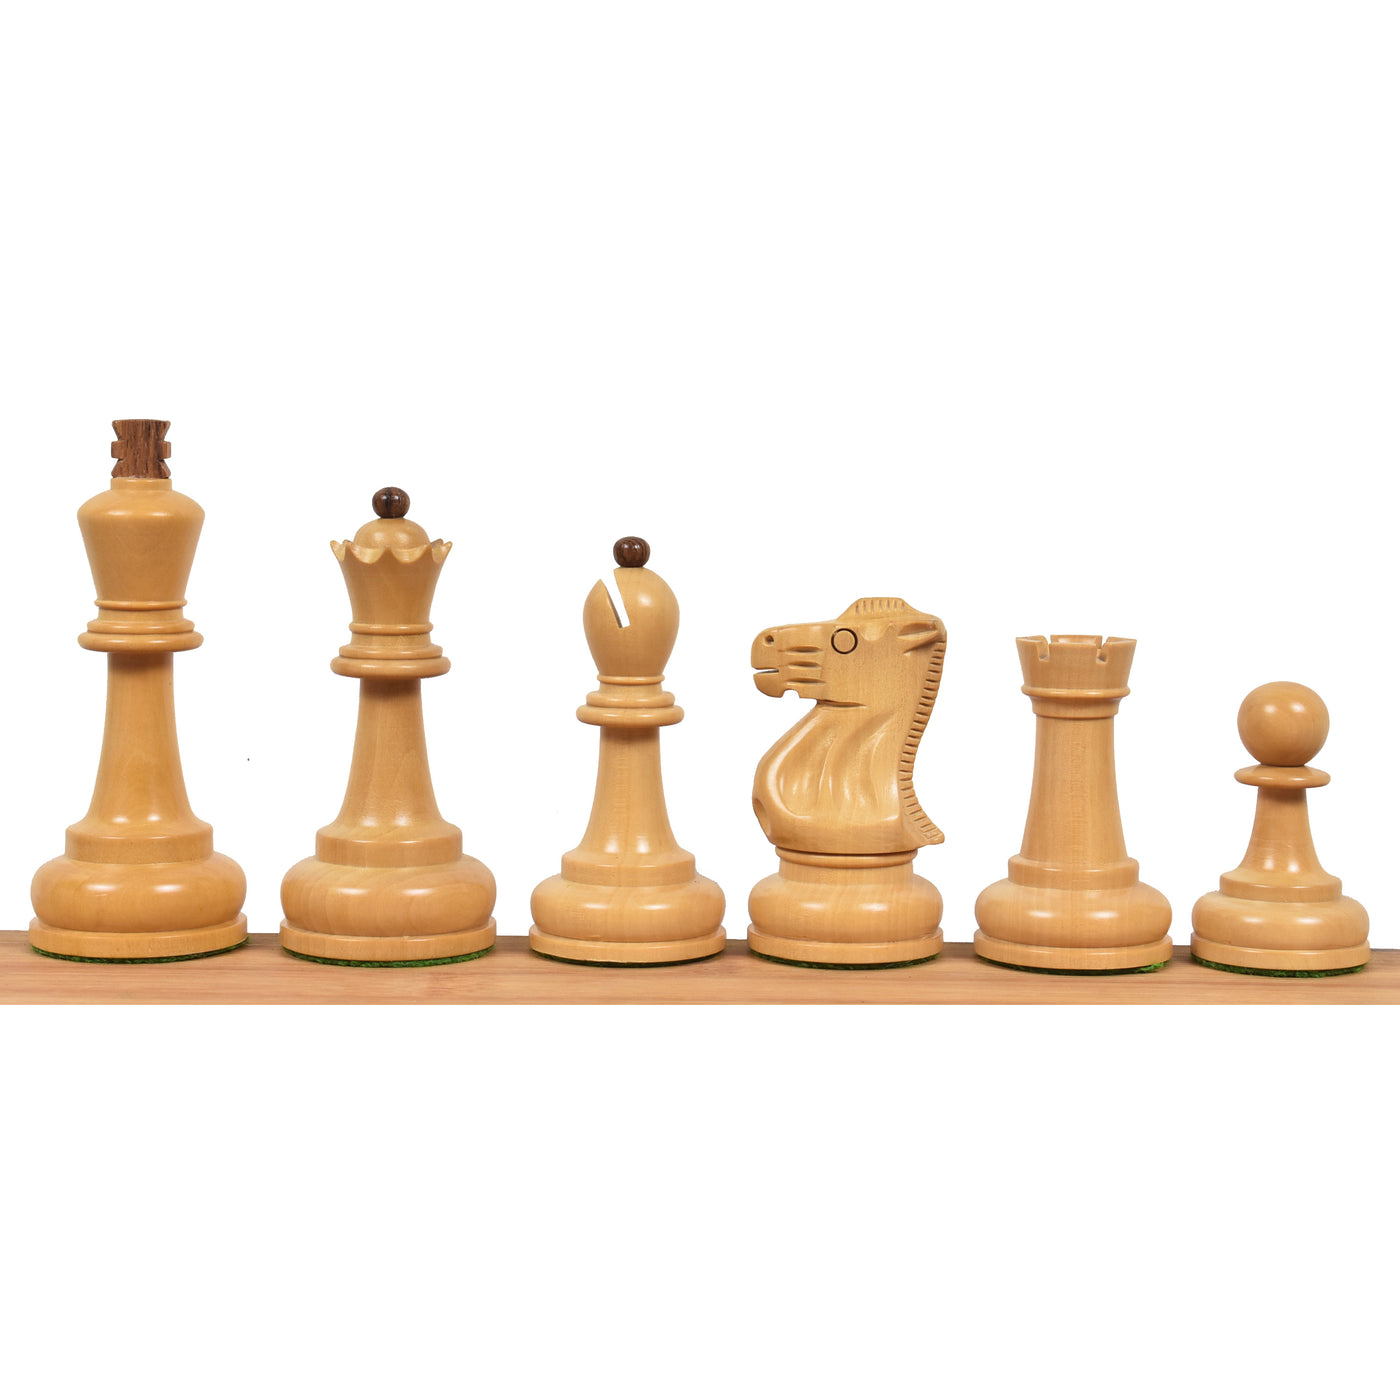 3.7" Soviet Großmeister Supreme Chess Pieces only Set- Weighted Golden Rosewood